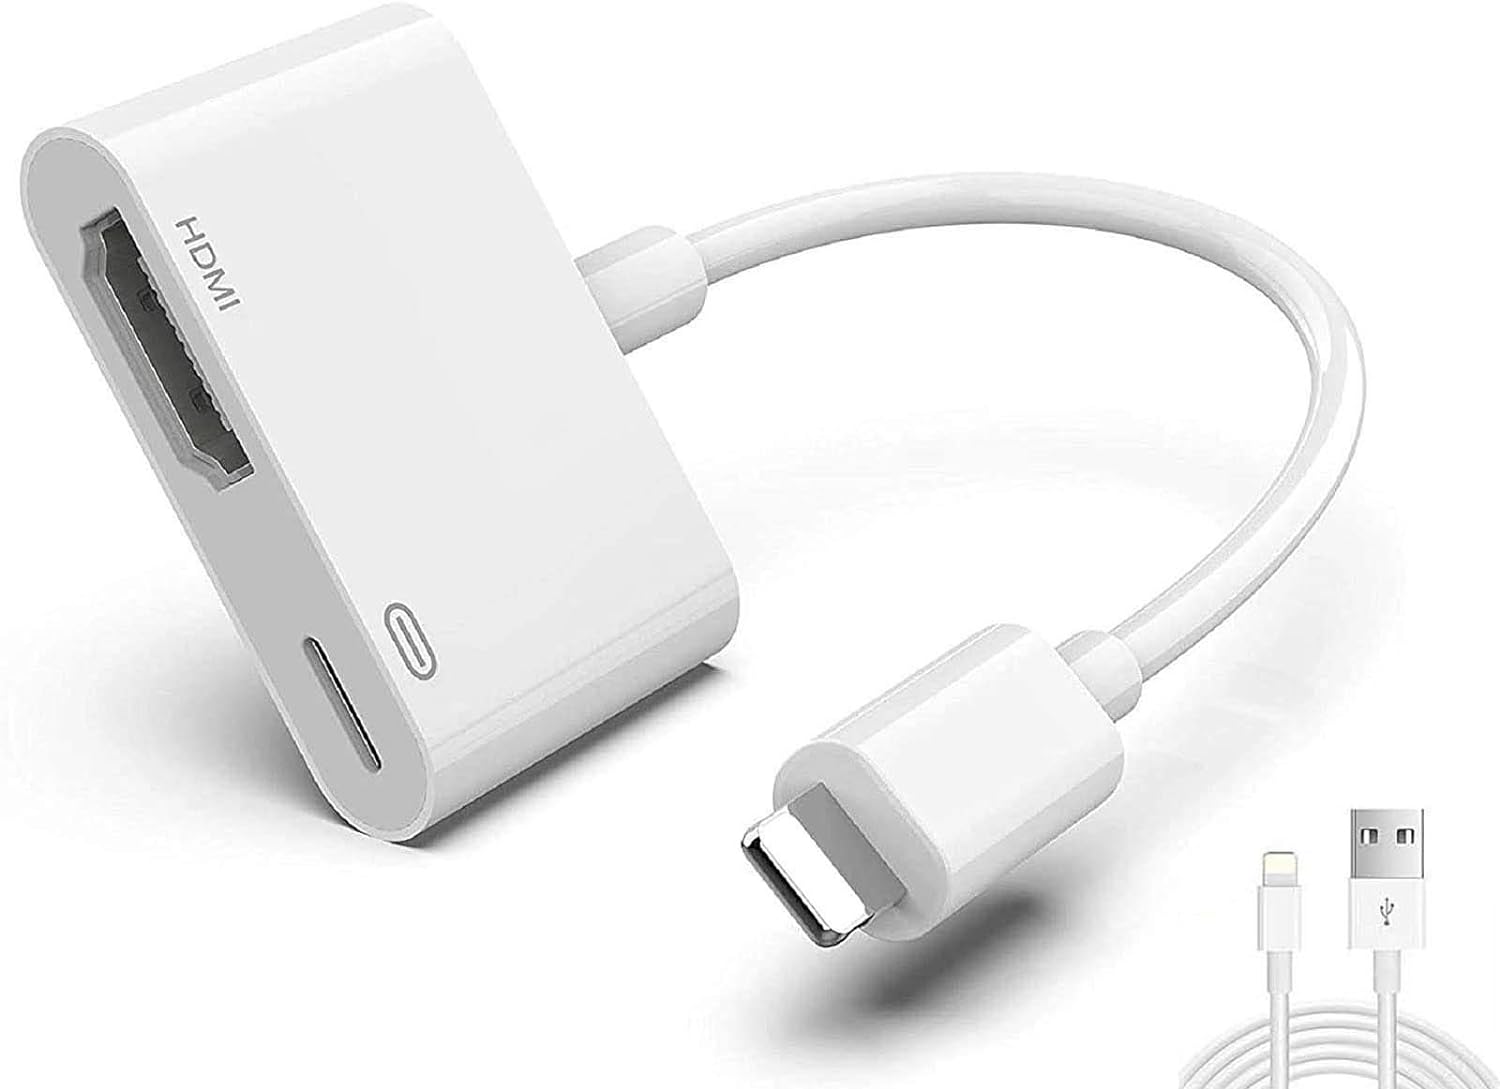 Lightning to HDMI Digital AV Adapter, 1080P With Charging Lightning Cable - White